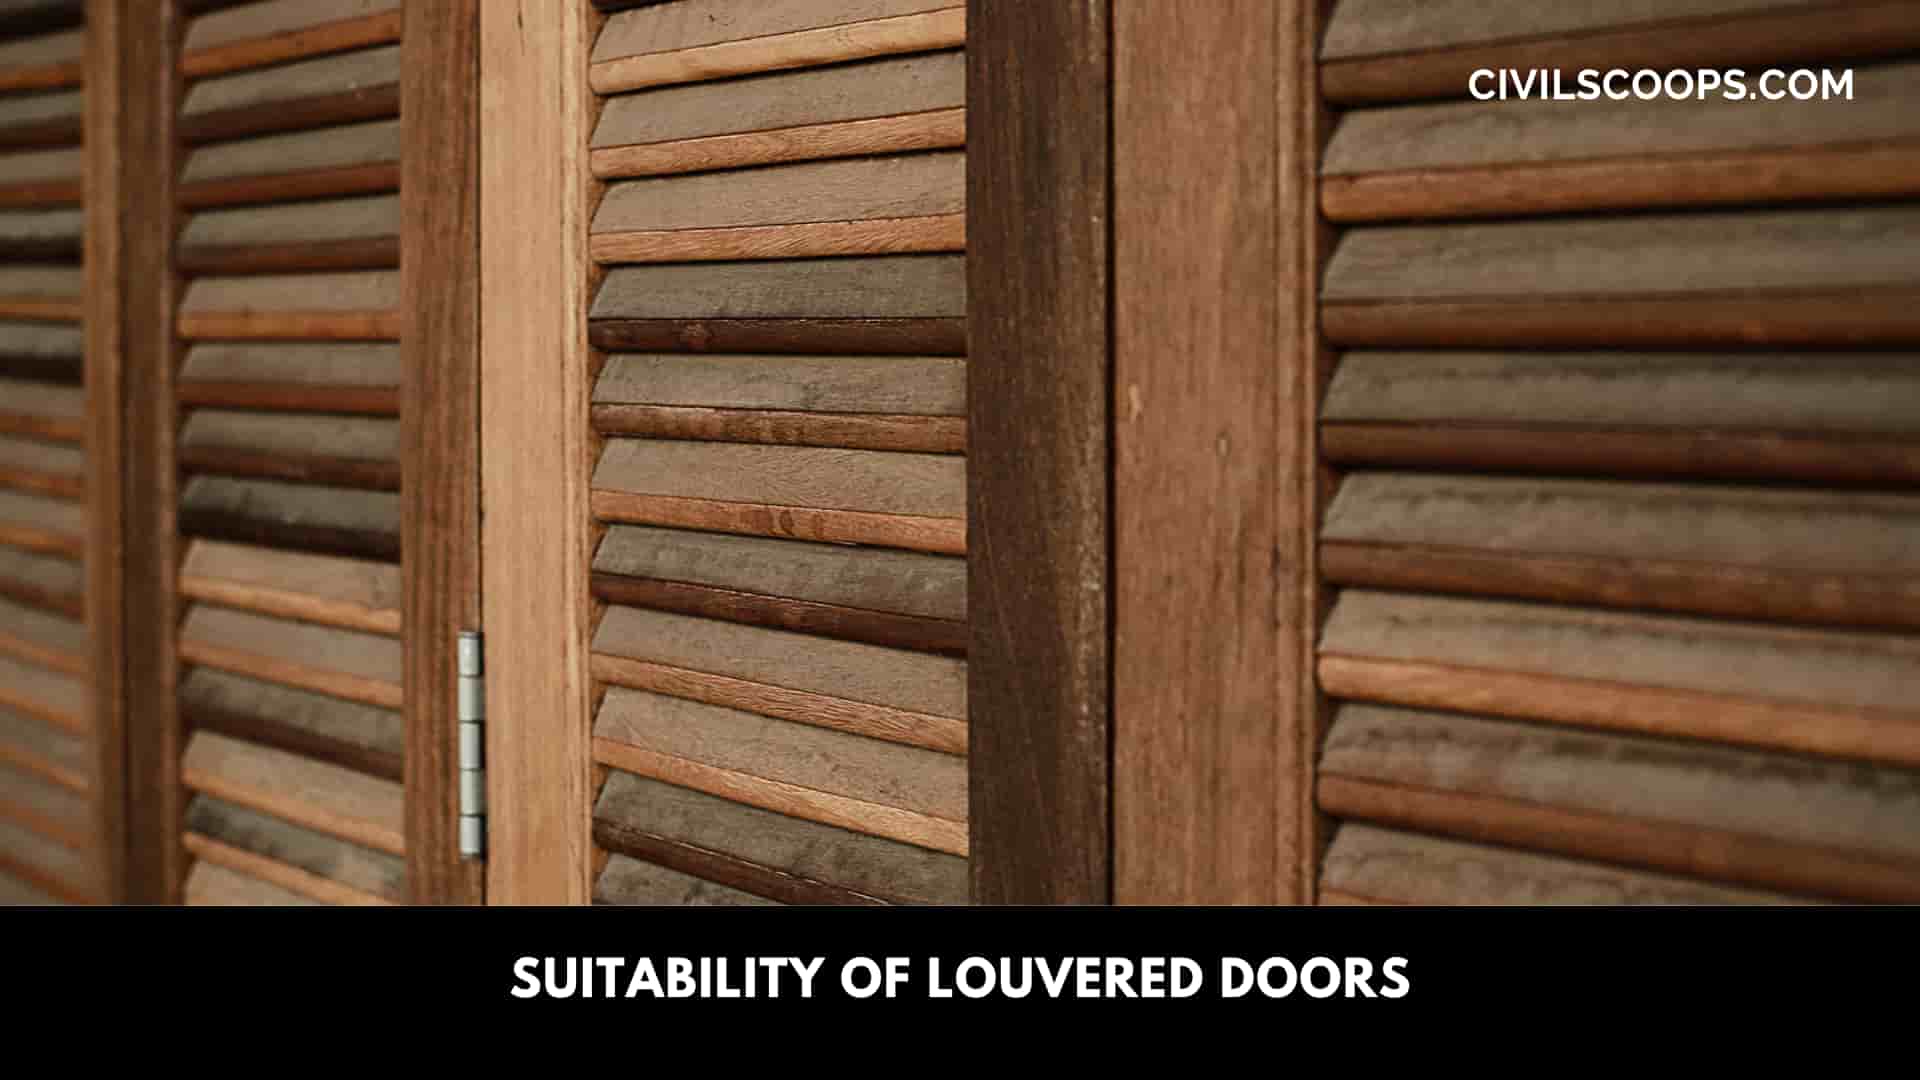 Suitability of Louvered Doors